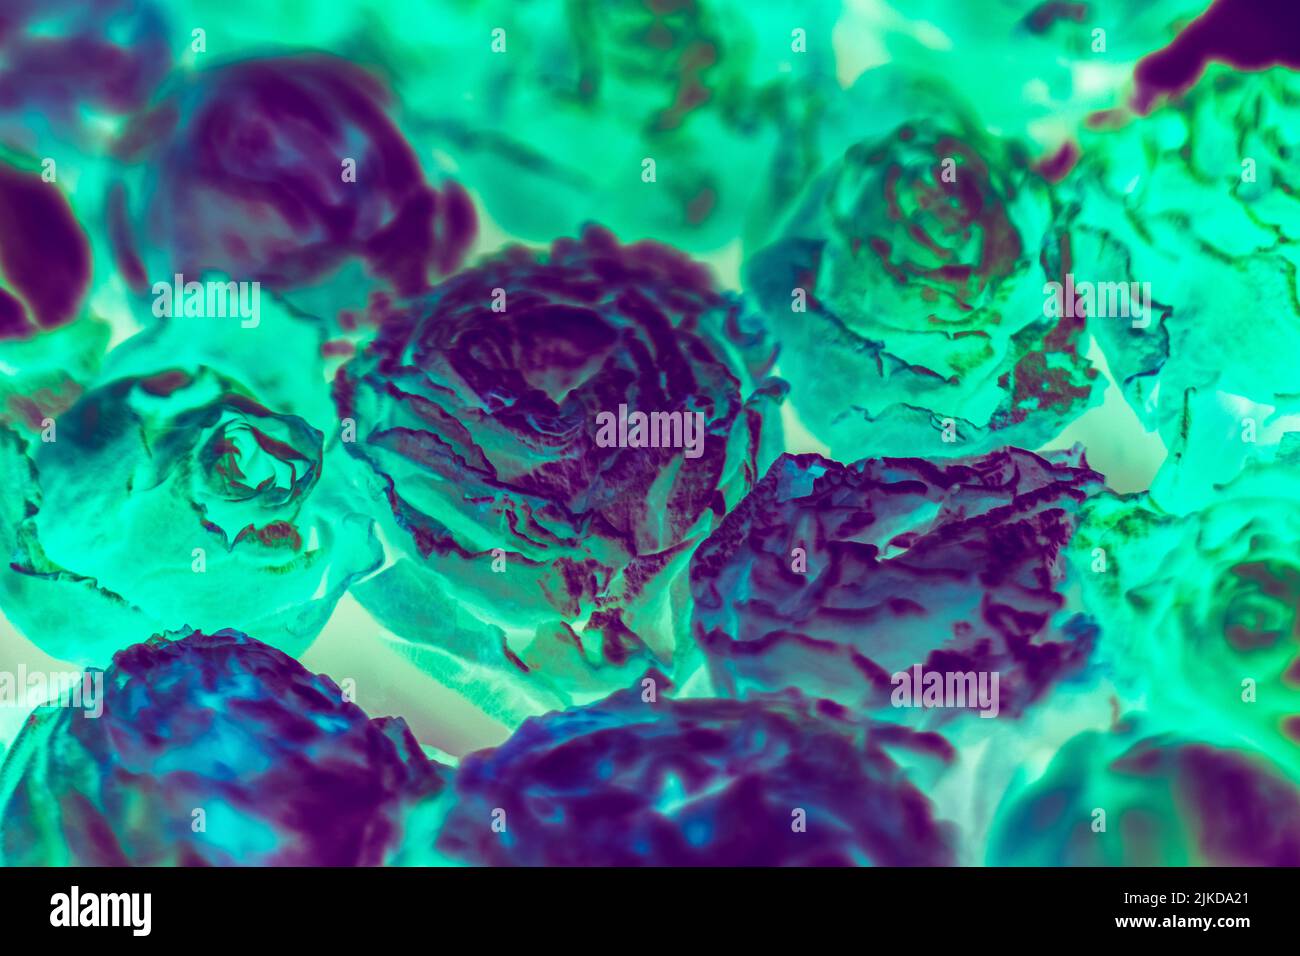 fluorescent flower background conceptual rose Stock Photo